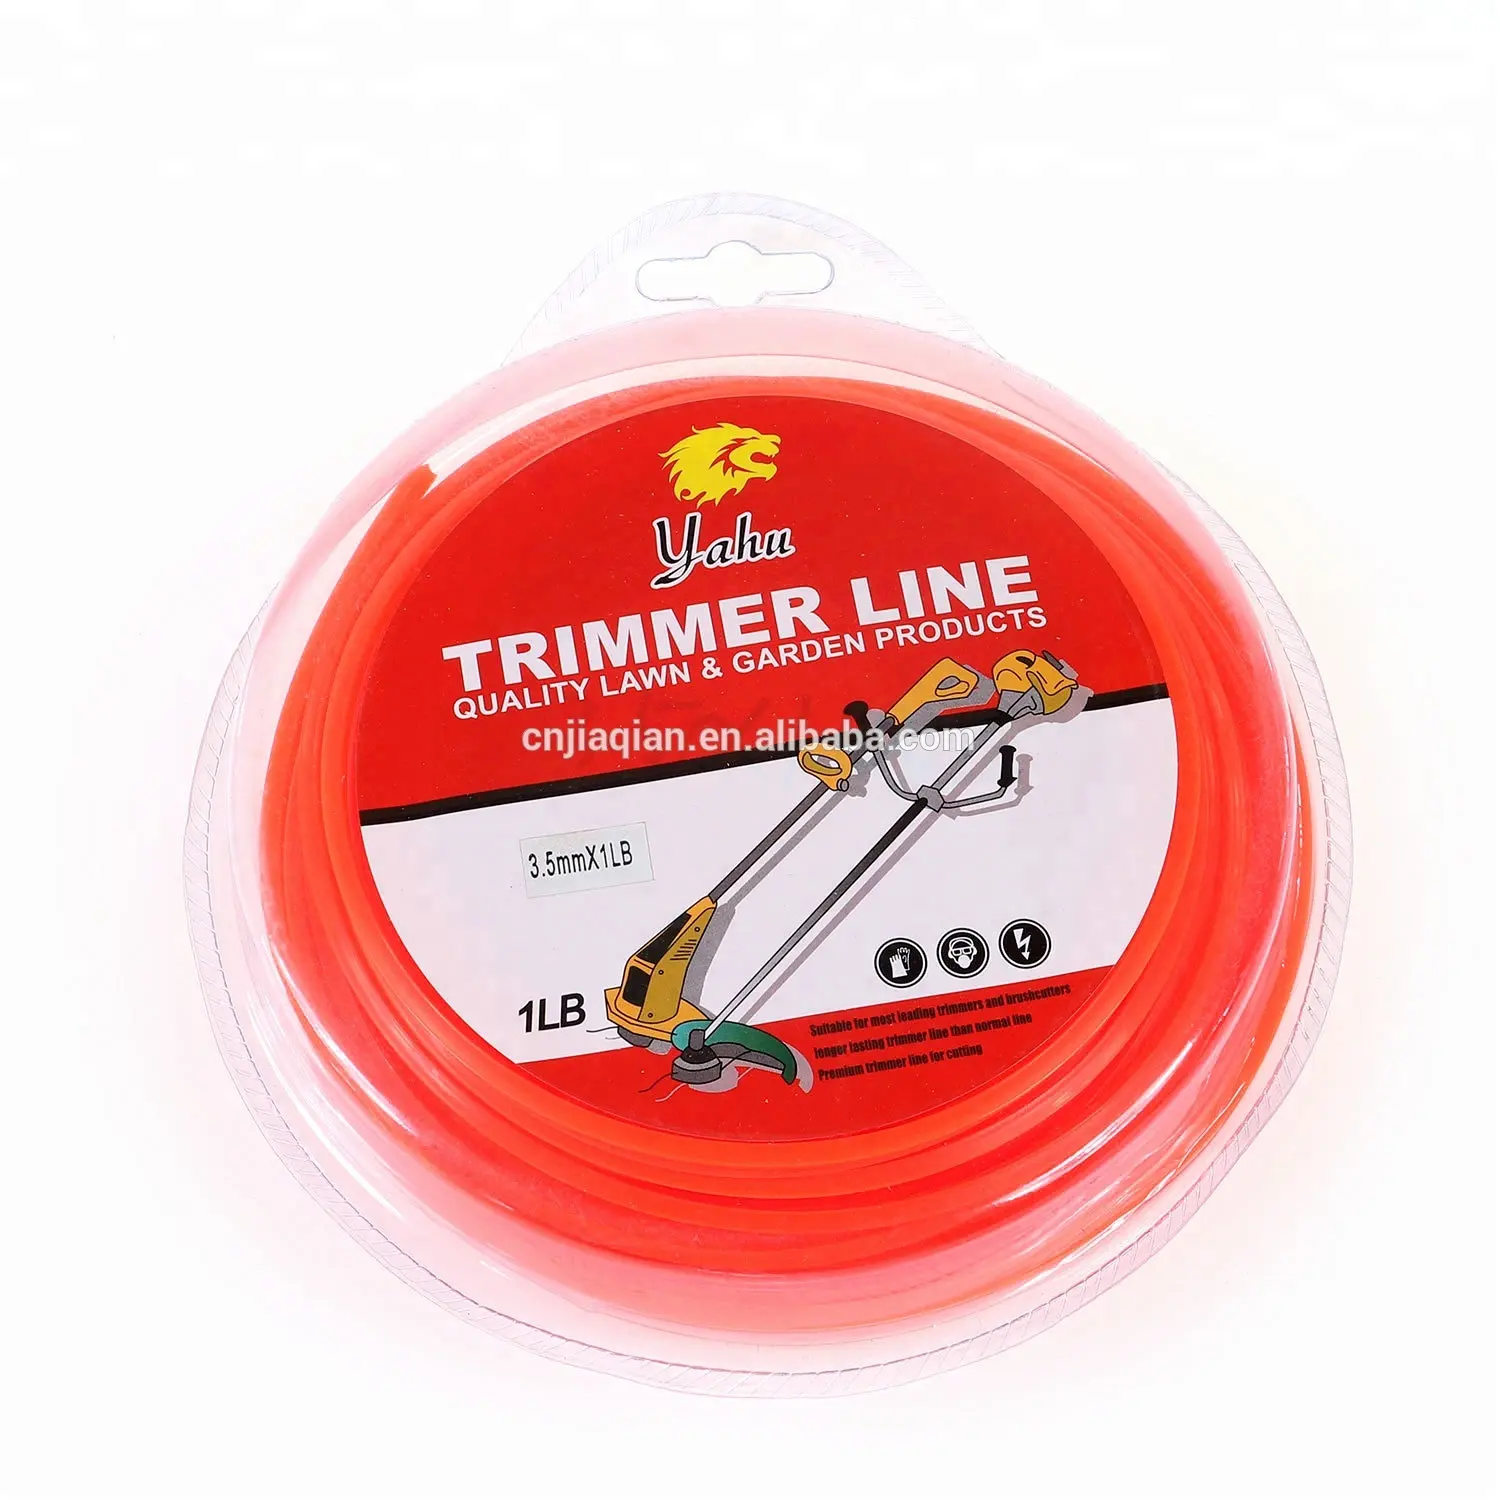 Trimmer line of trimmer head nylon line fits for stihl brush cutter spare parts for grass cutter